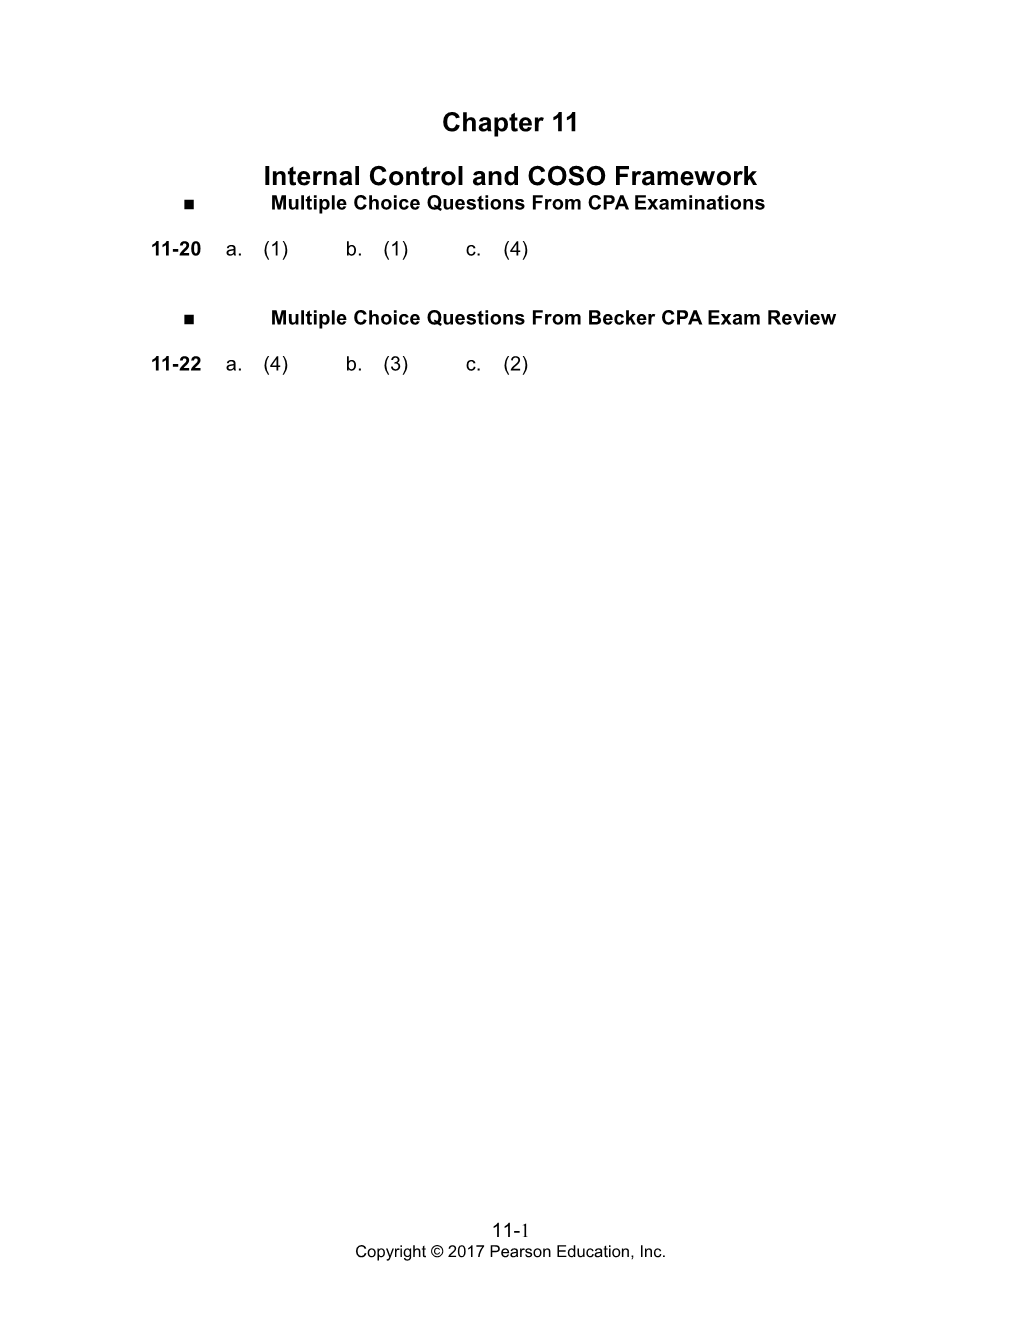 Internal Control and COSO Framework